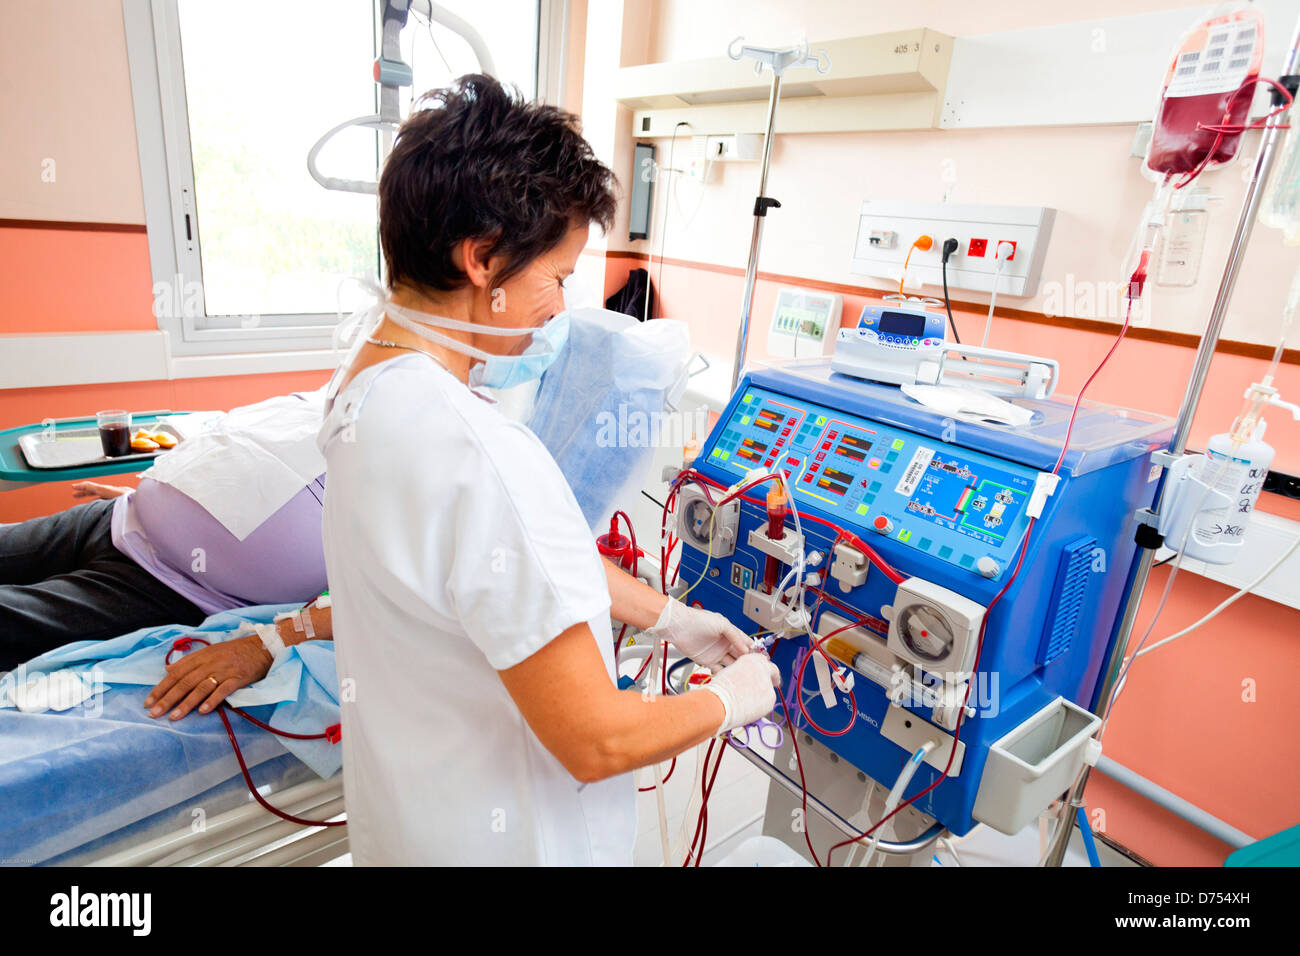 Blood transfusion anemic patient during hemodialysis session Nurse according protocol control Transfusion Limoges hospital Stock Photo